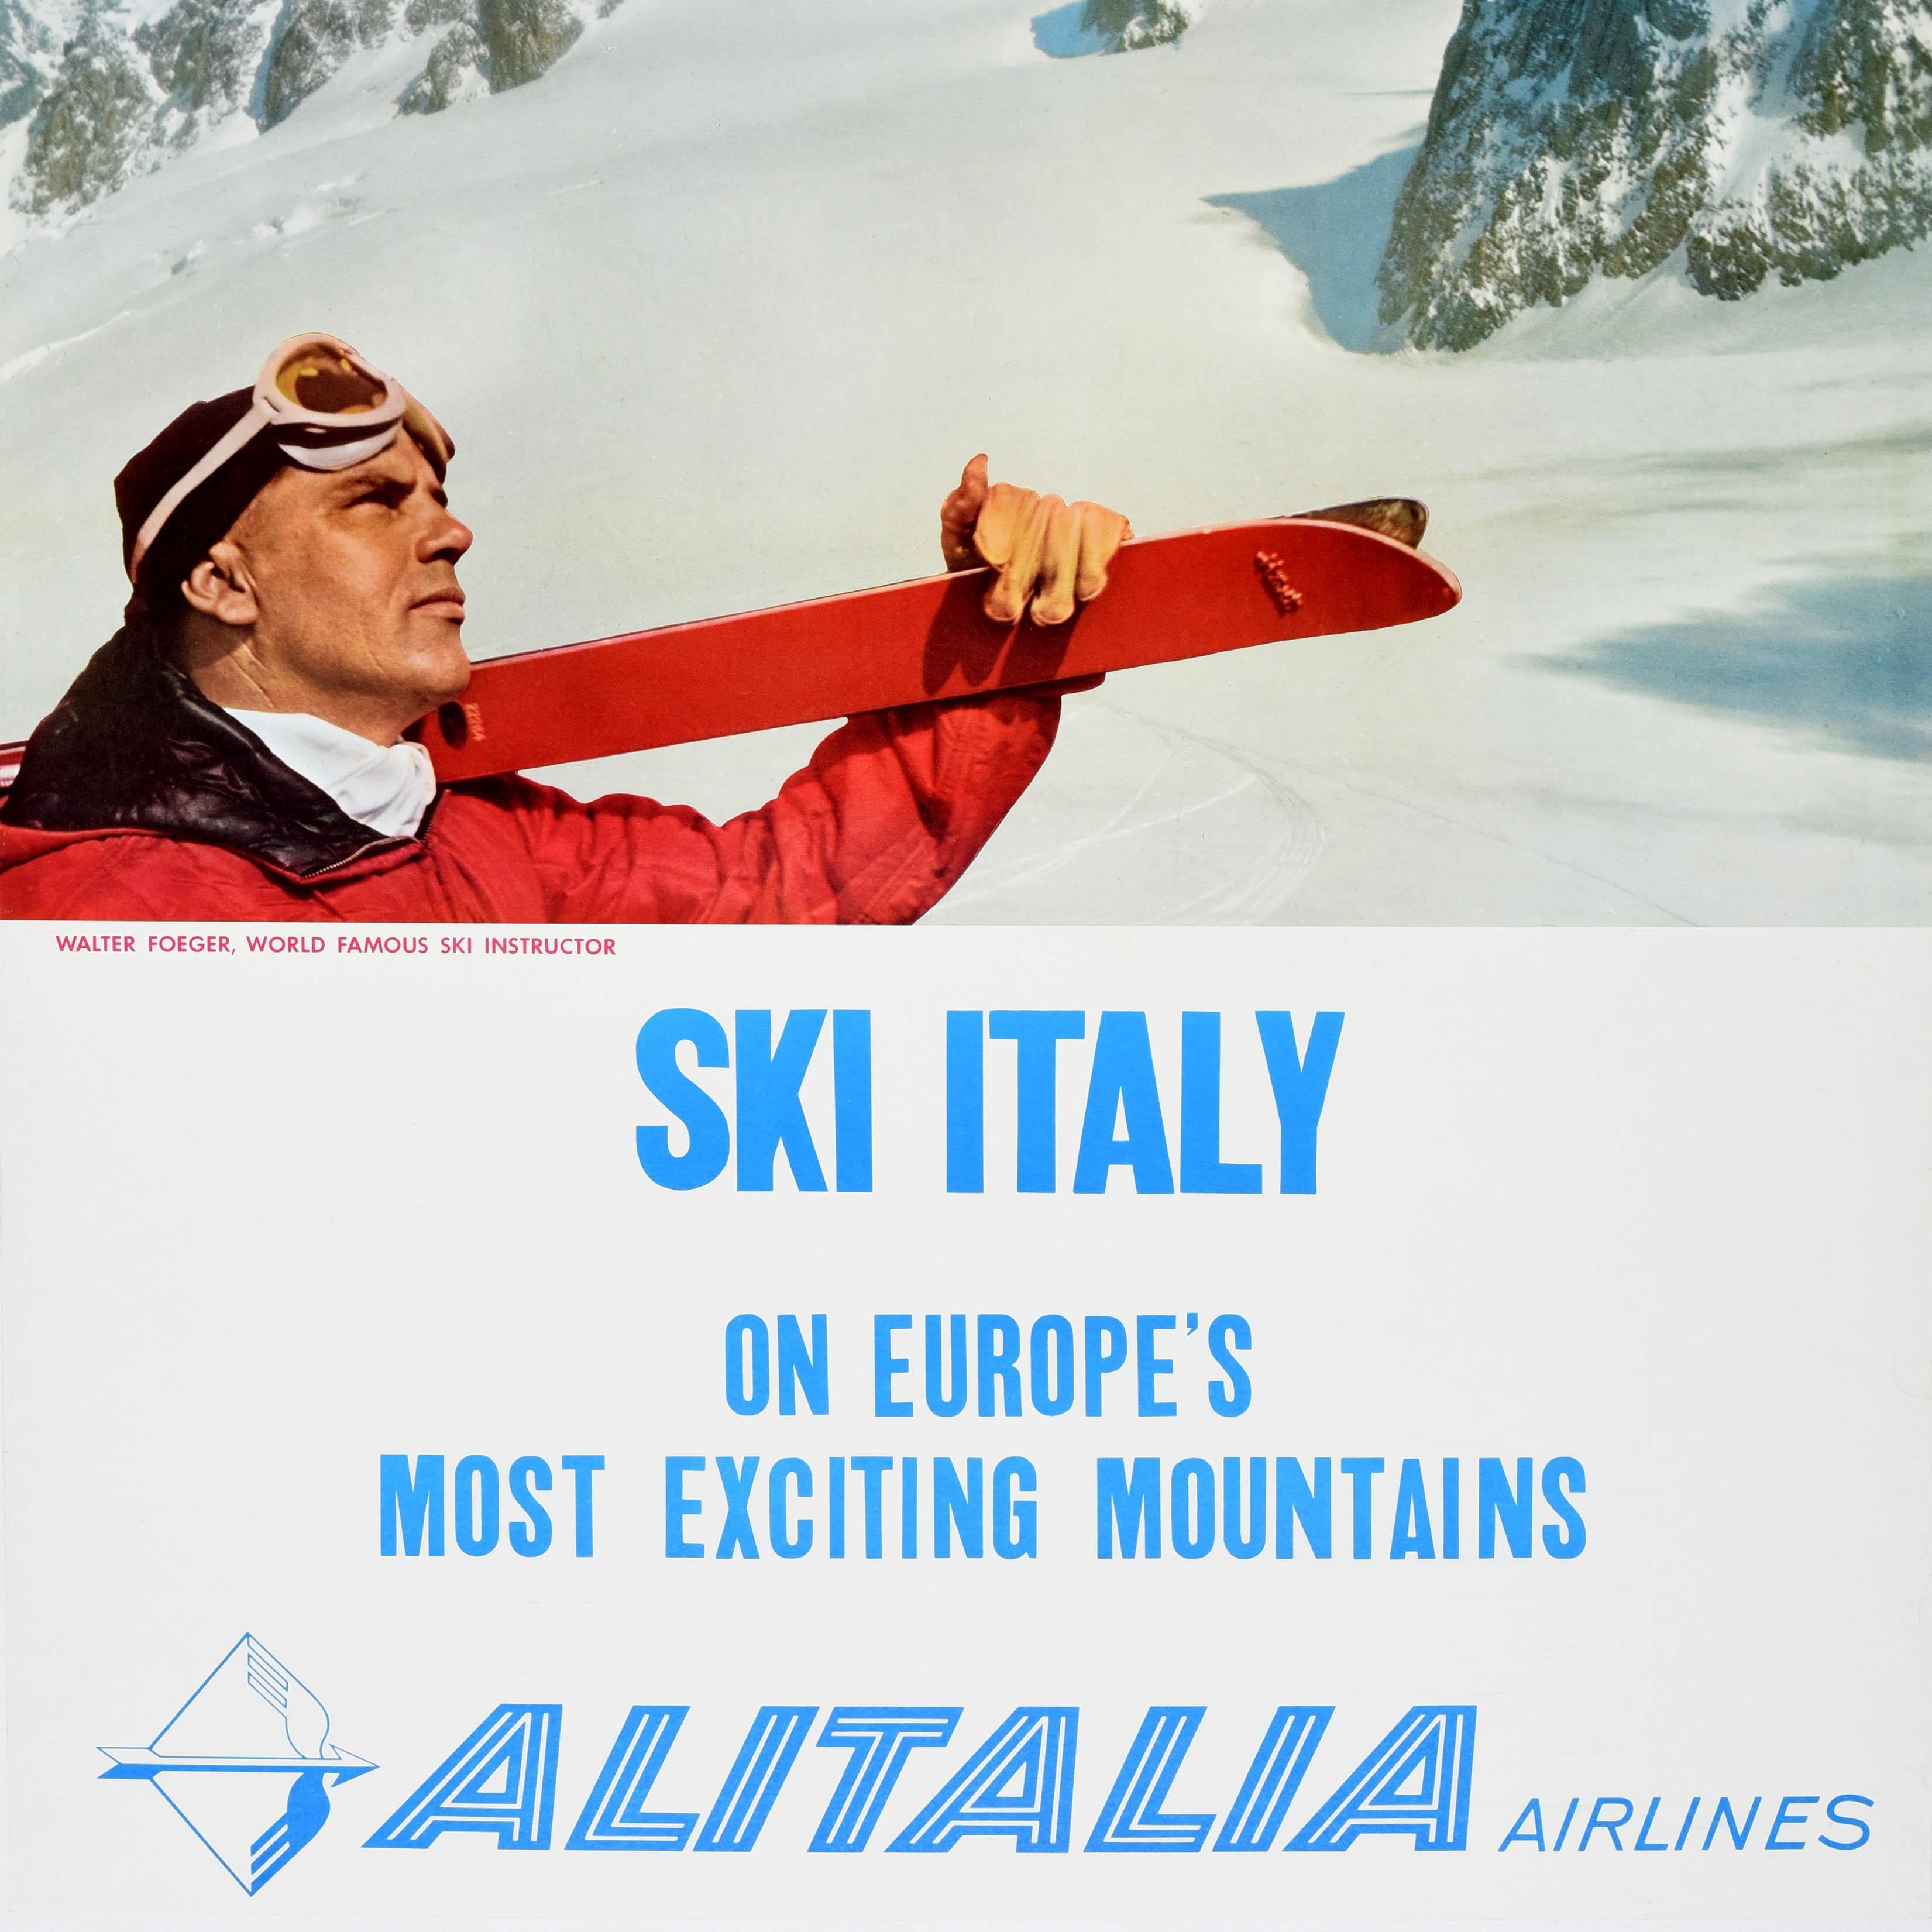 Original Vintage Skiing Travel Poster Ski Italy Alitalia Airlines Walter Foeger In Good Condition For Sale In London, GB